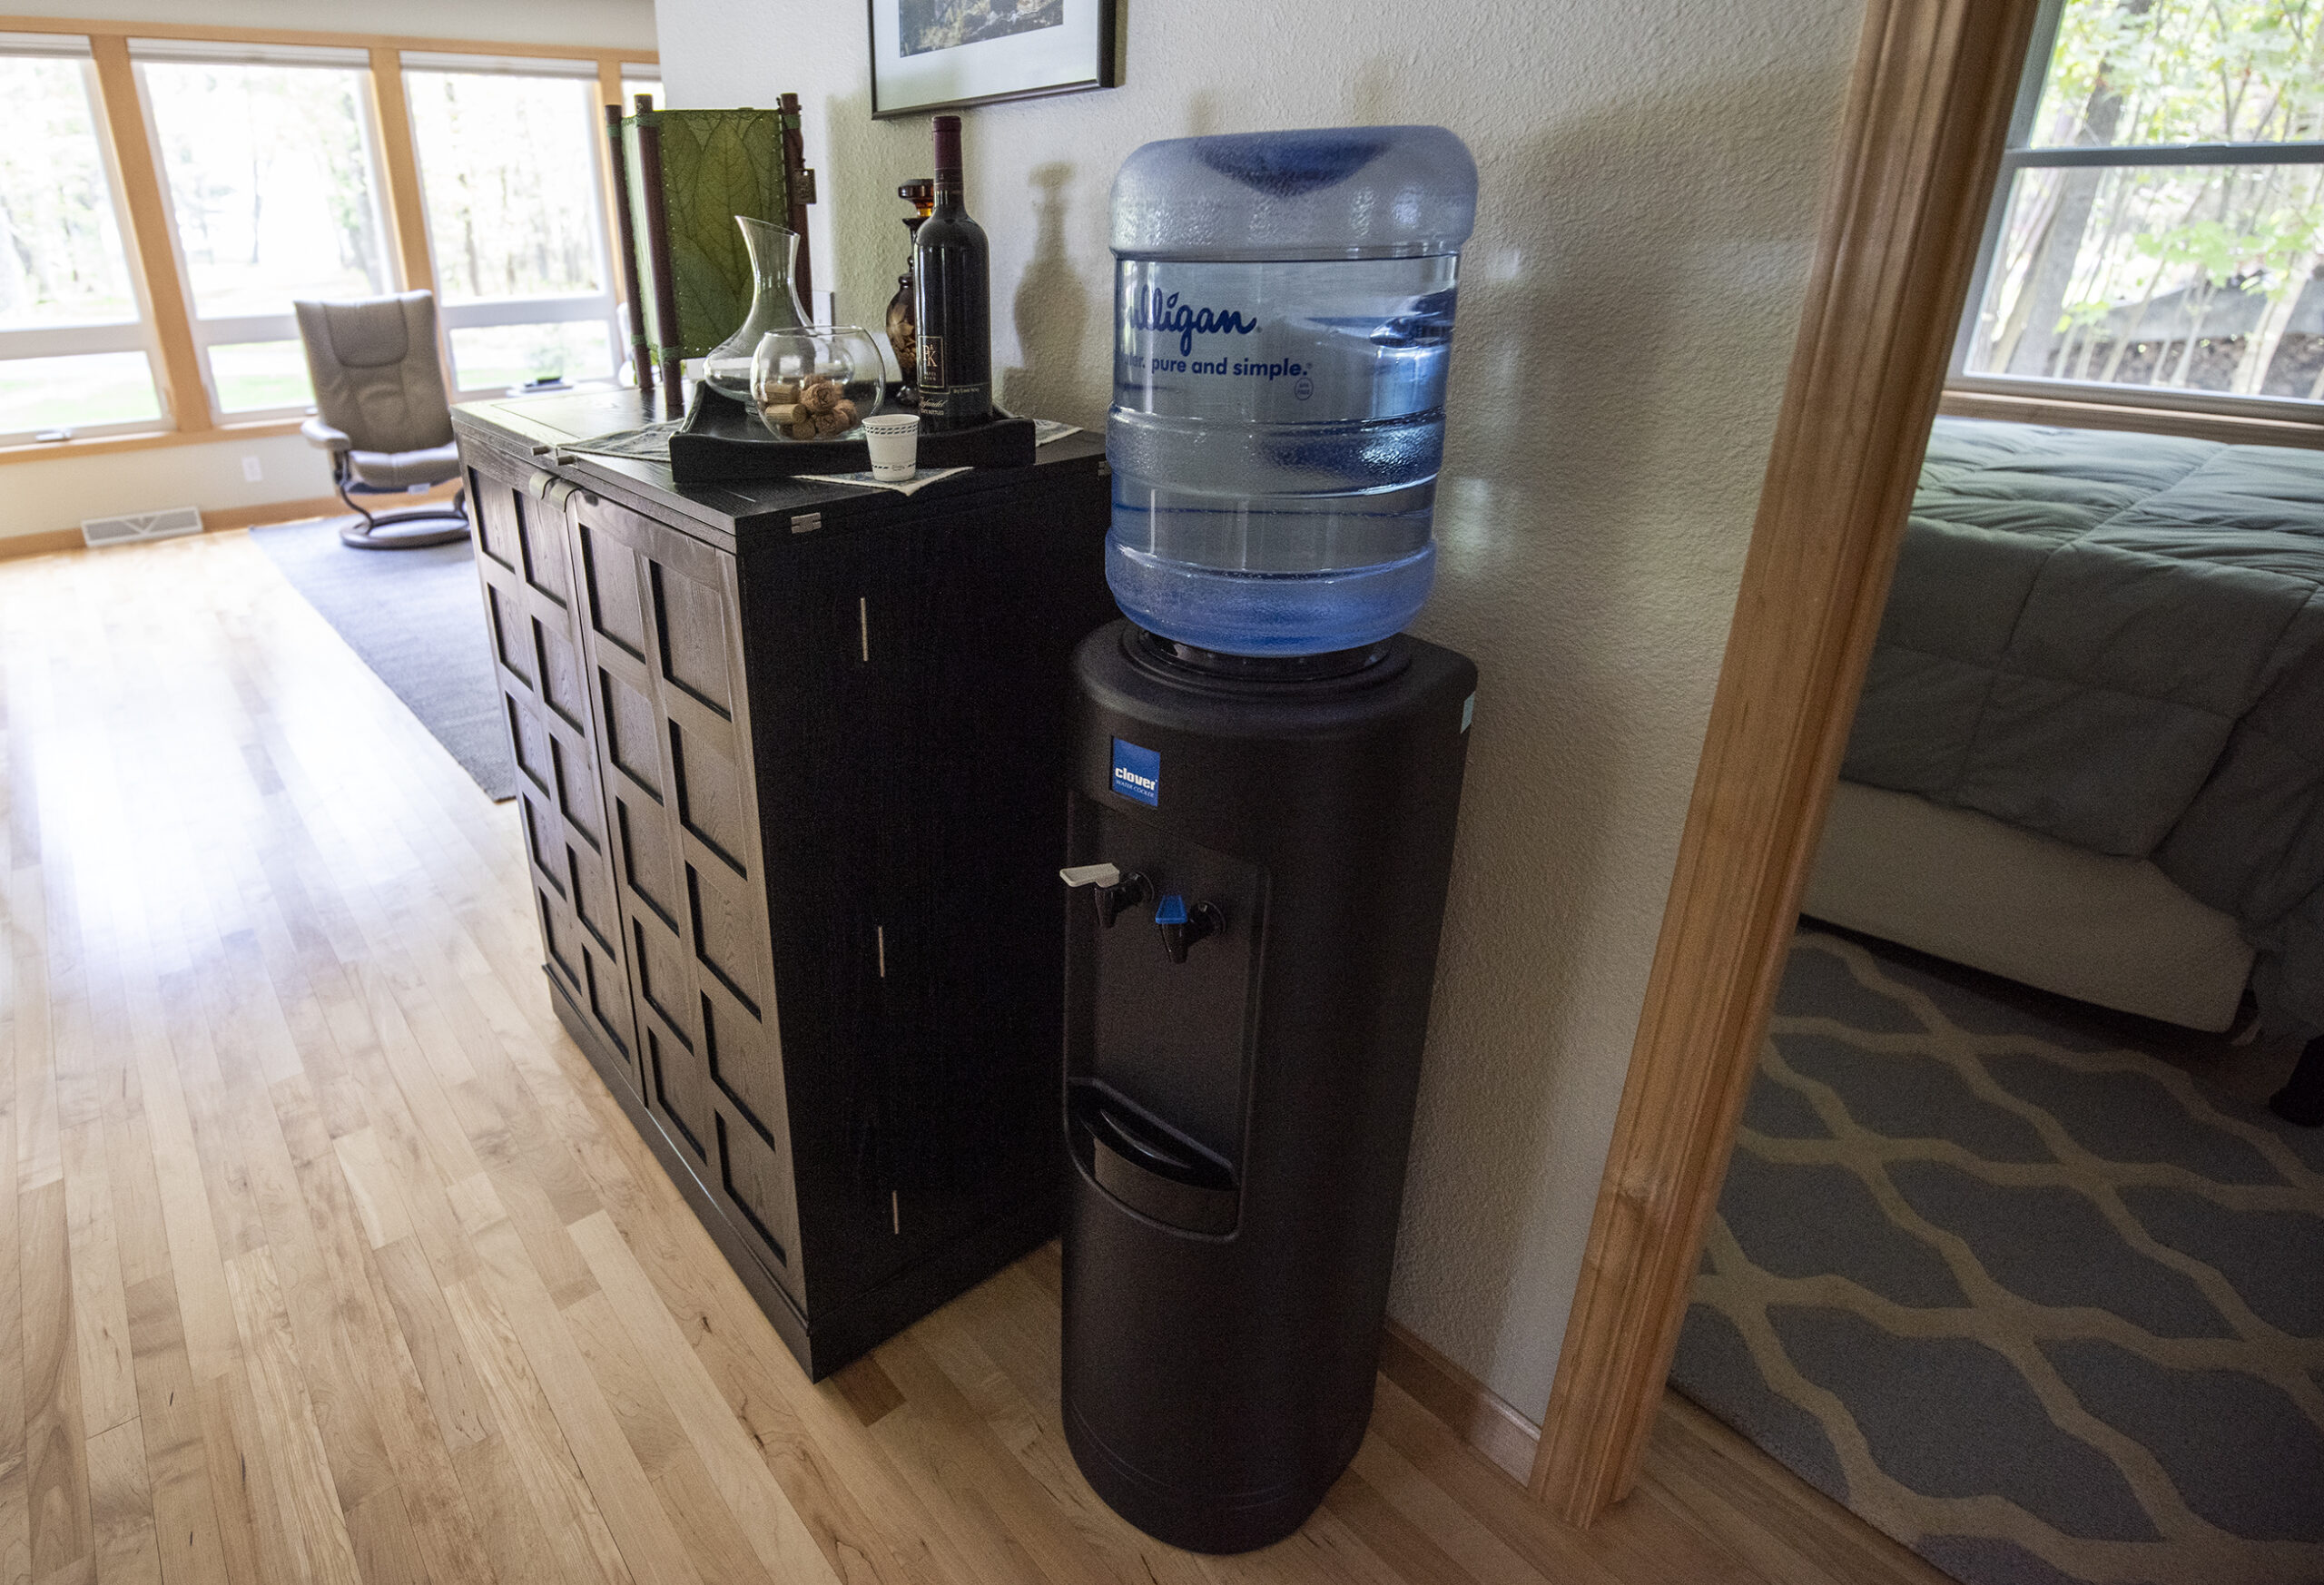 A Culligan water dispenser system is set up in a home.